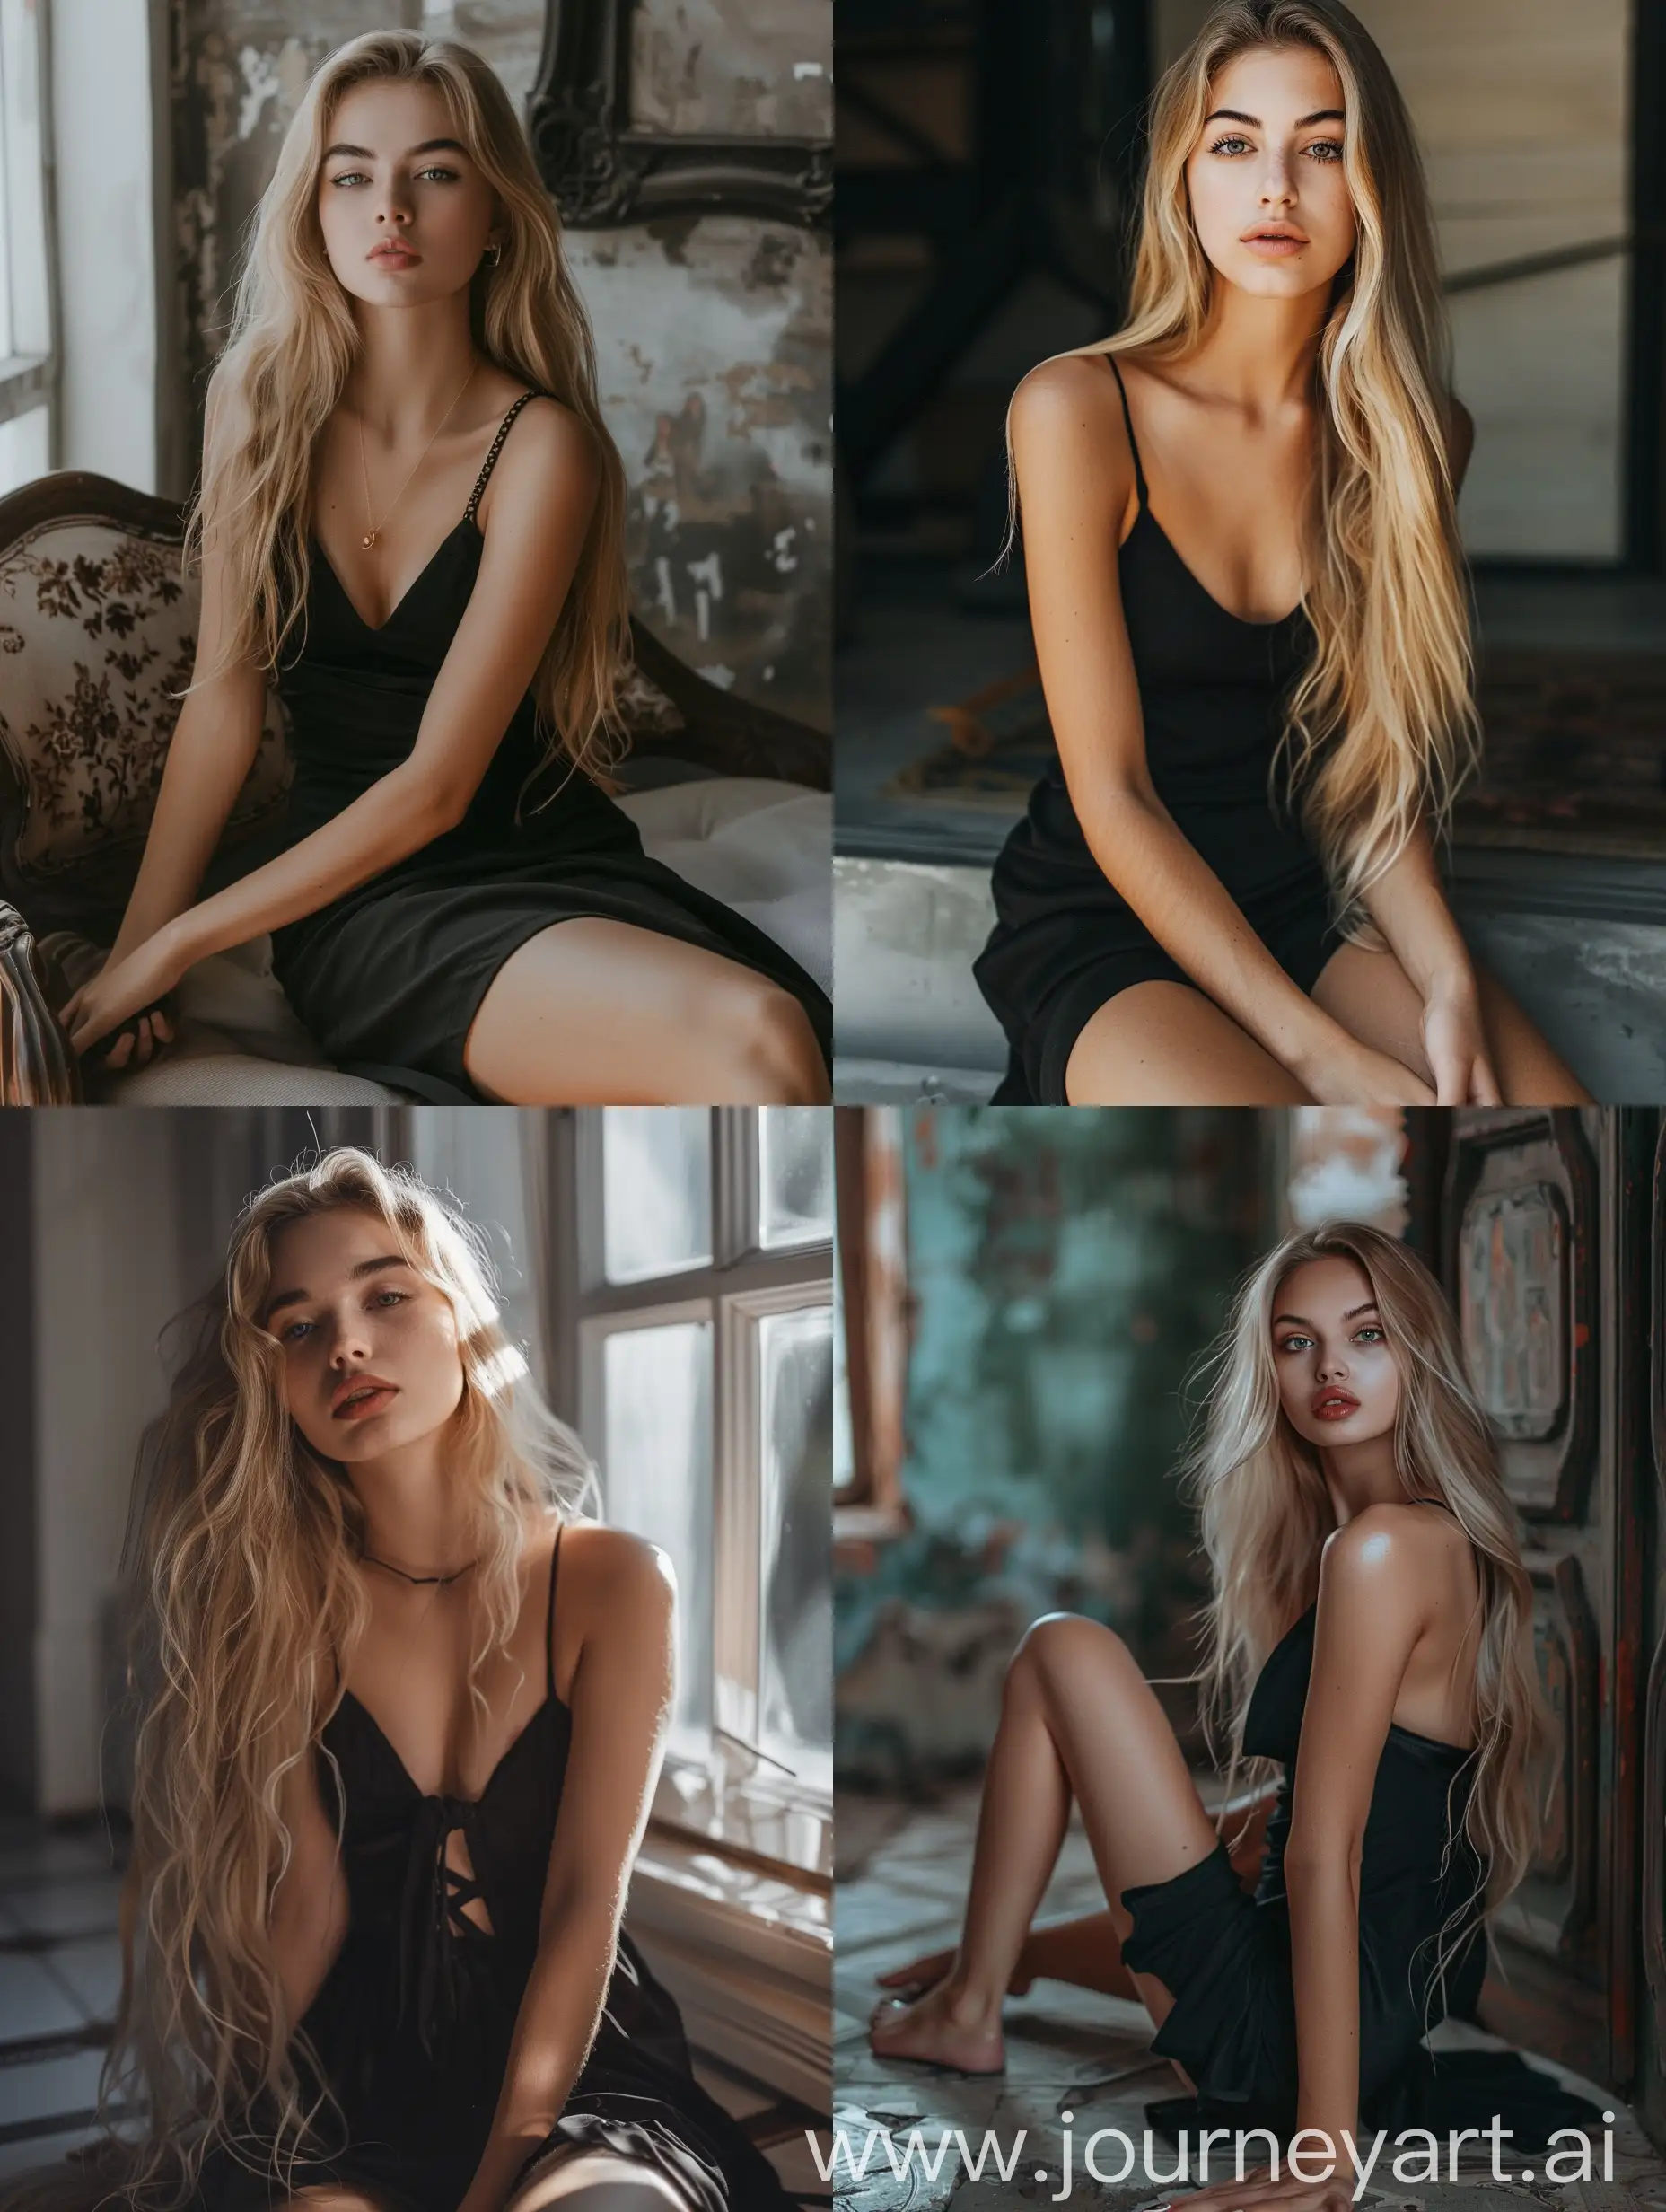 Young-Influencer-with-Long-Blond-Hair-in-School-Setting-Black-Dress-and-Makeup